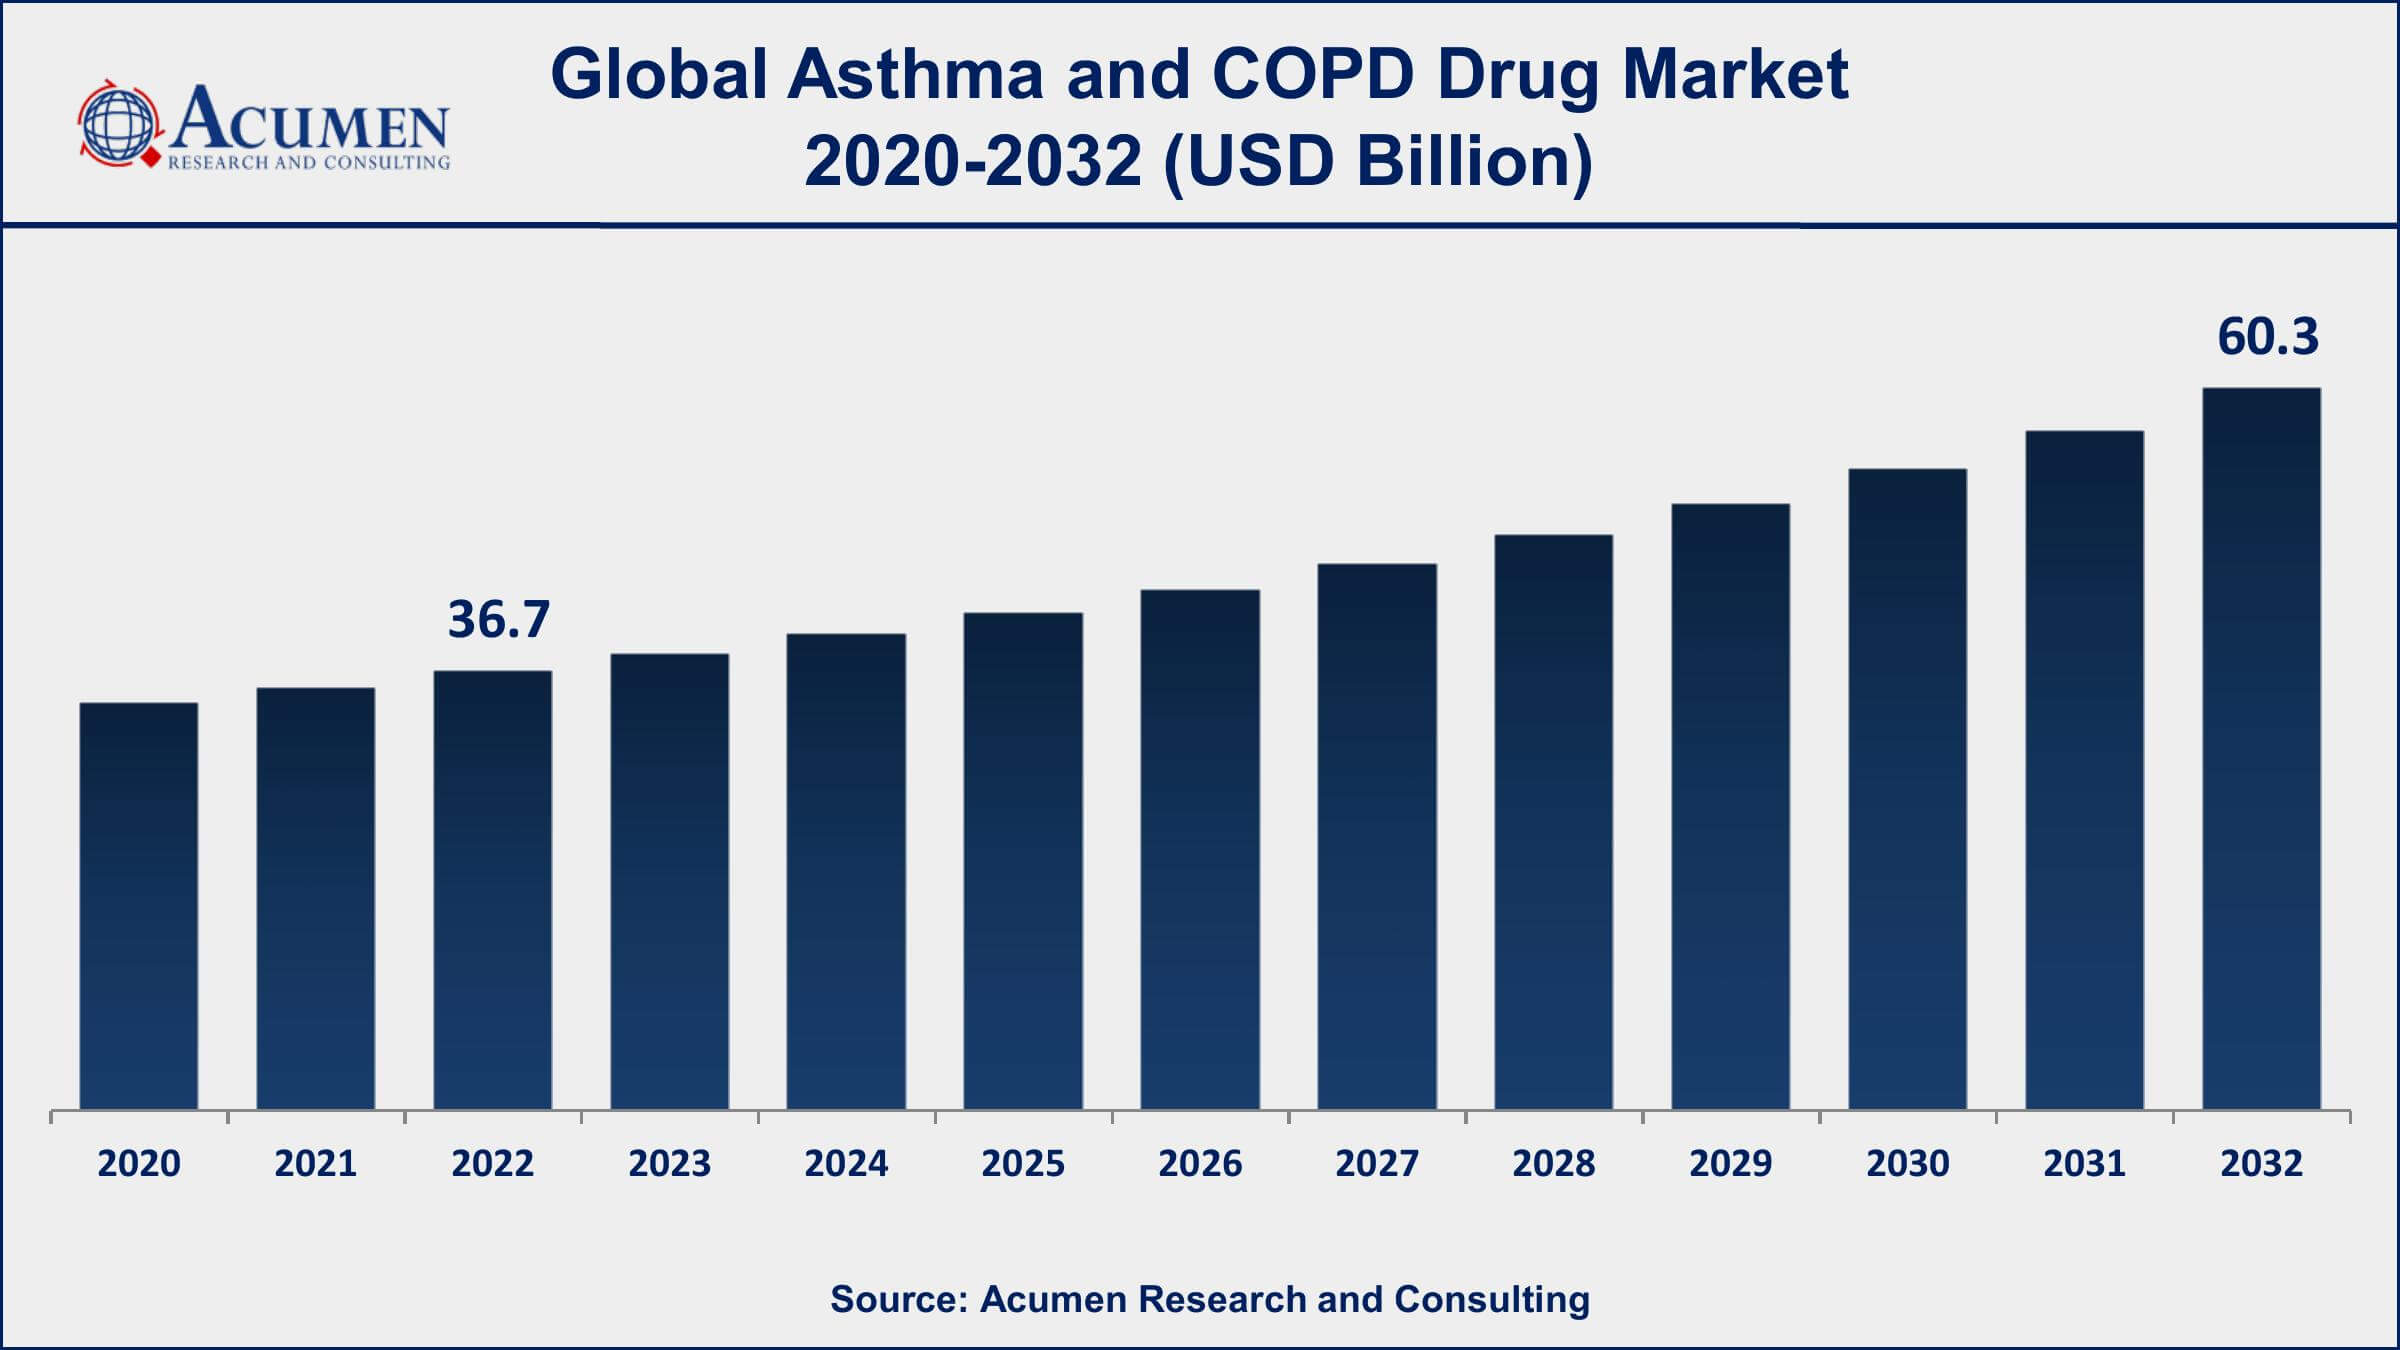 Asthma and COPD Drug Market Drivers